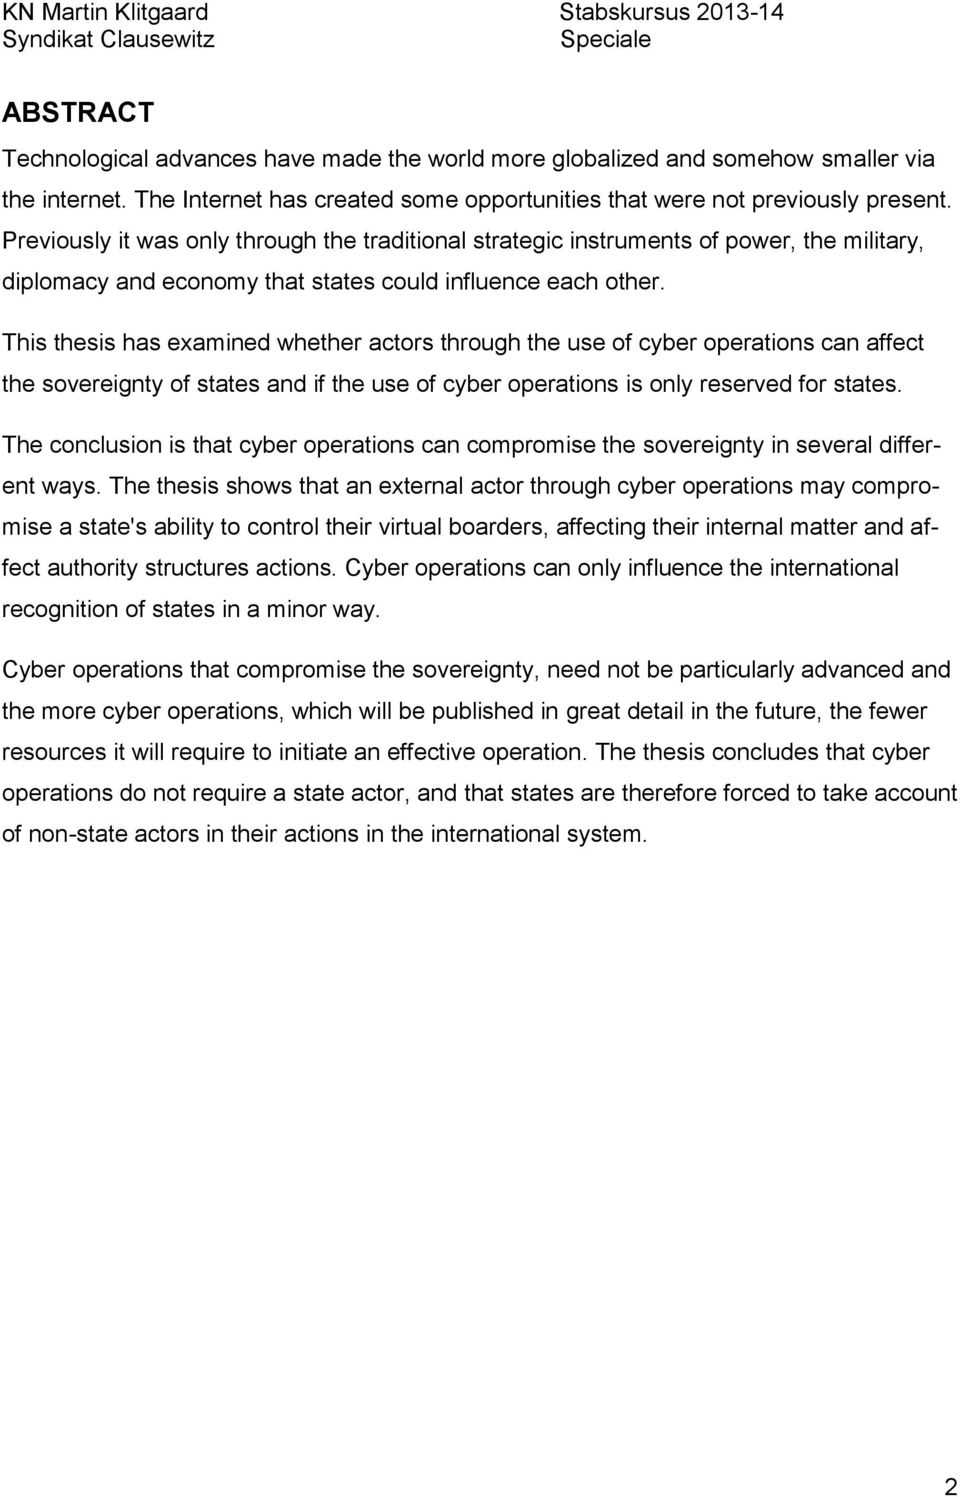 This thesis has examined whether actors through the use of cyber operations can affect the sovereignty of states and if the use of cyber operations is only reserved for states.